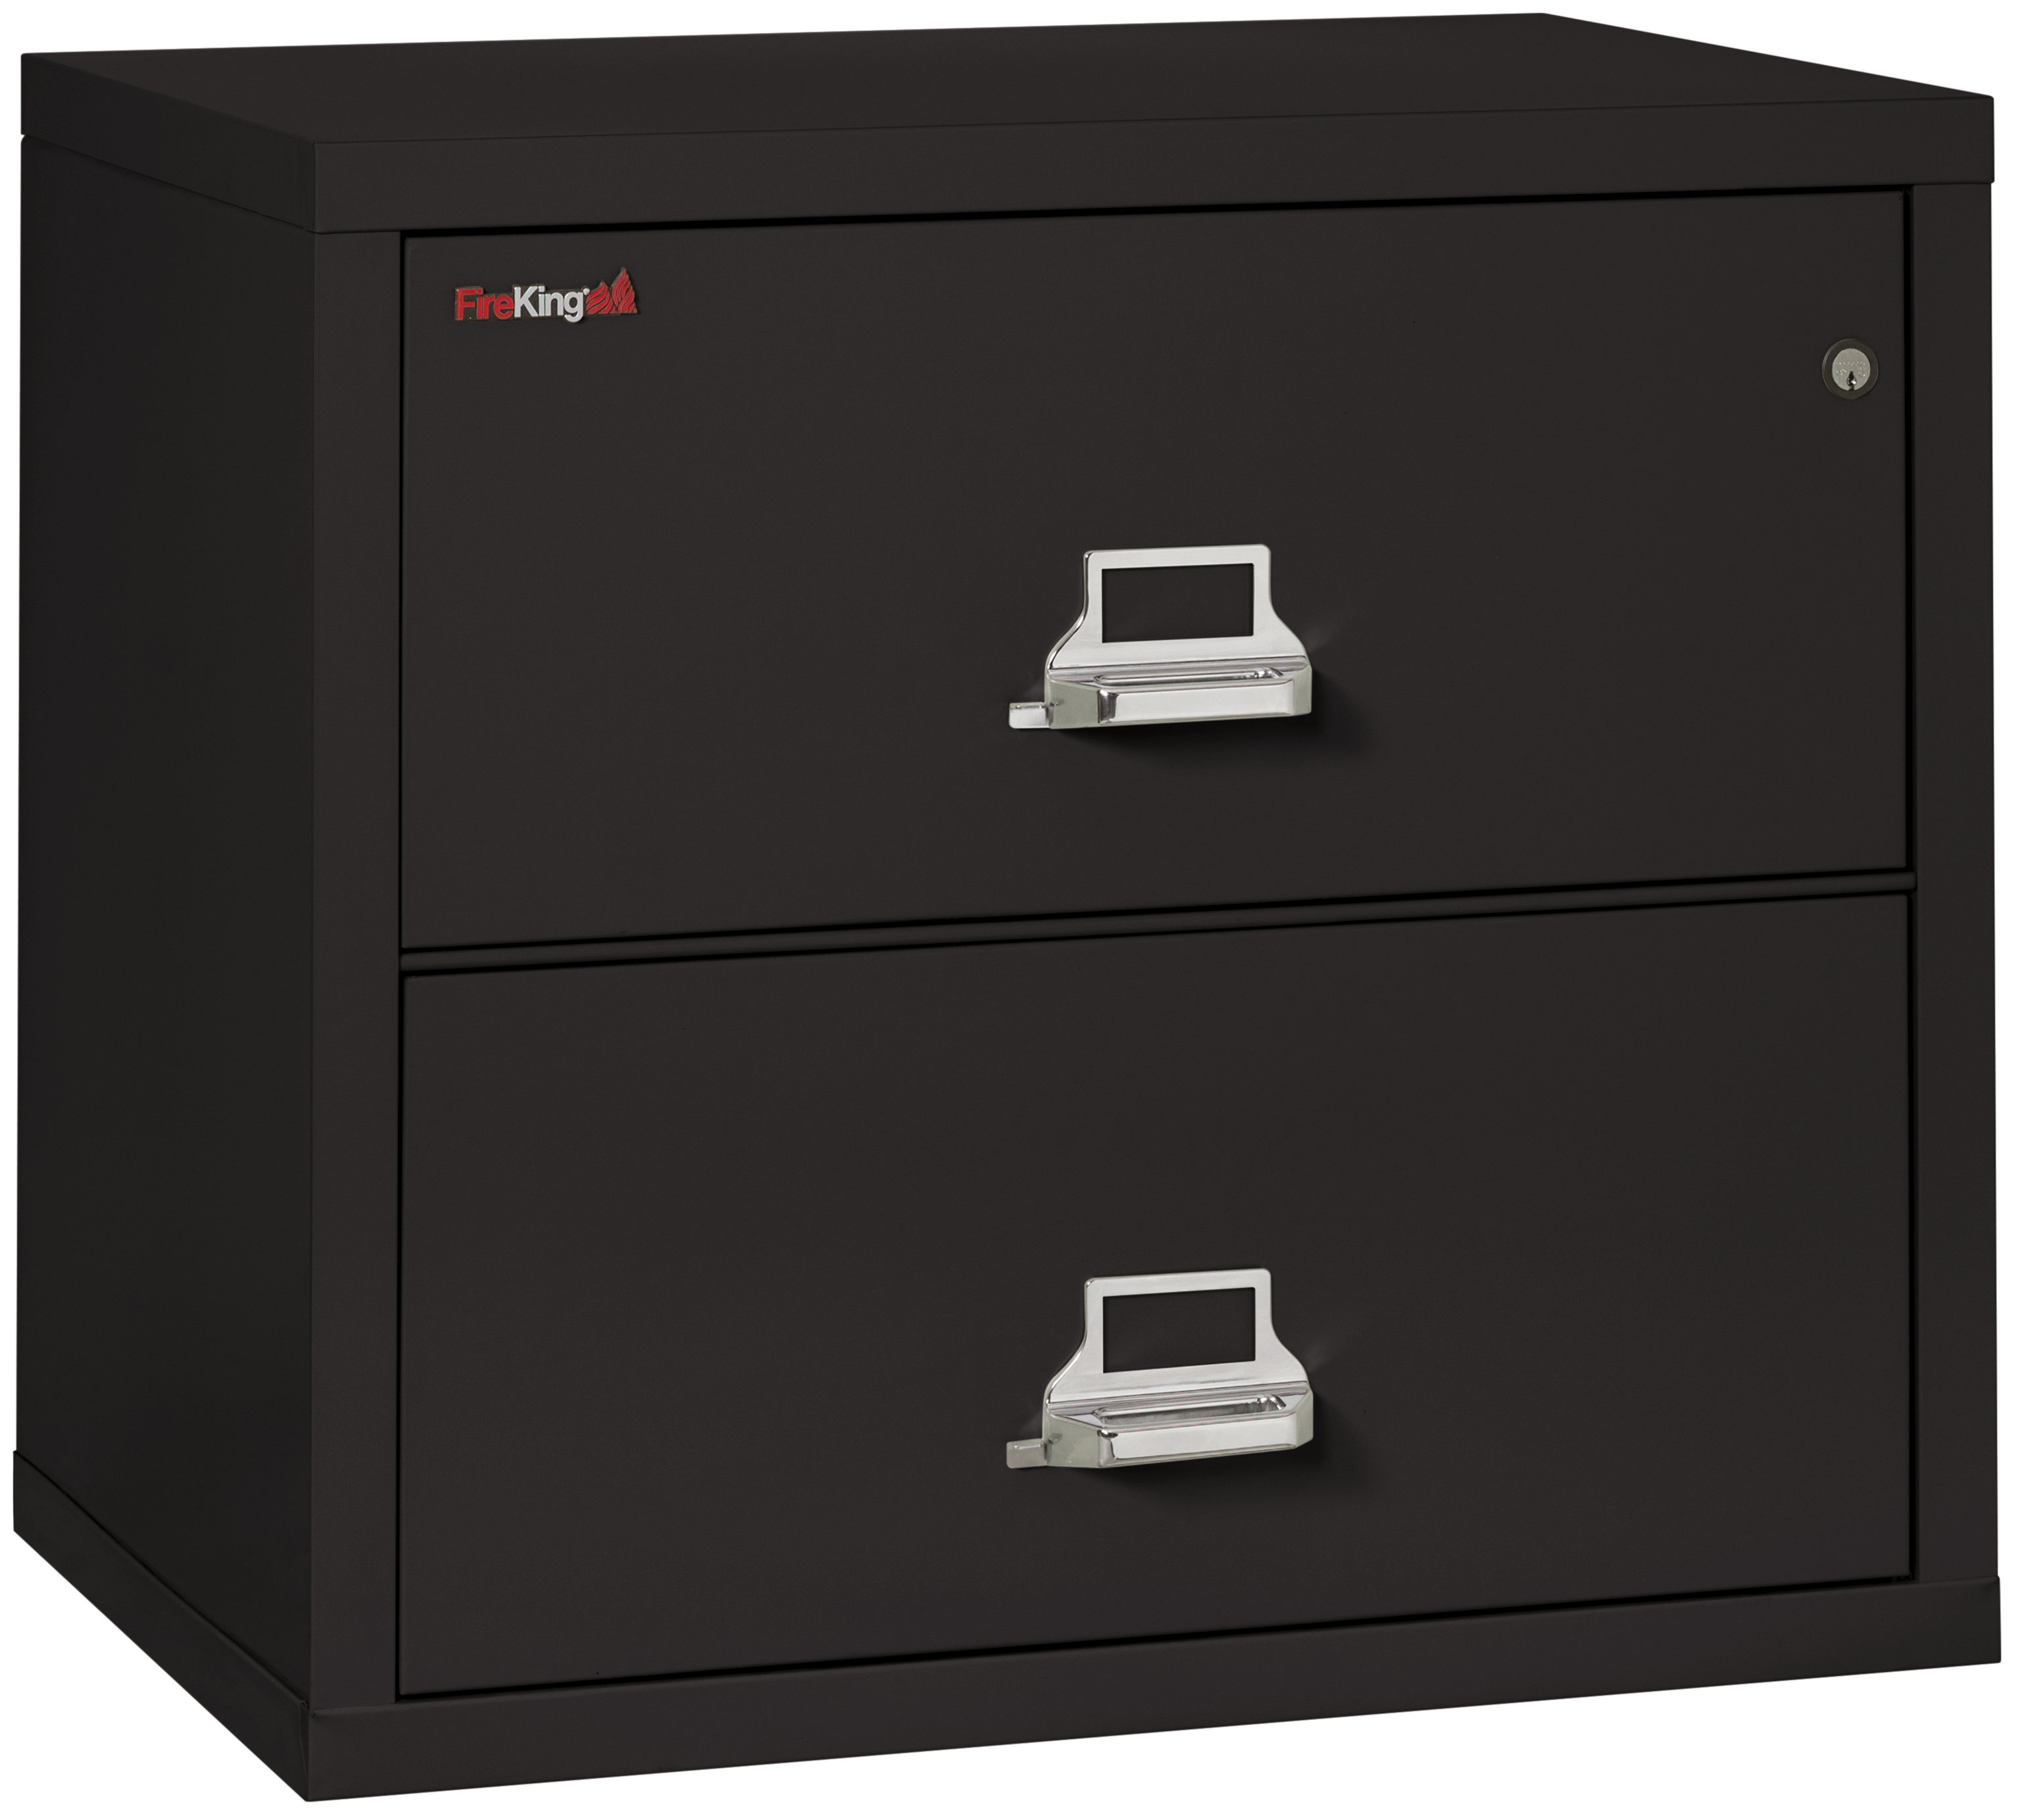 Fireking Fireproof 2 Drawer Lateral File Cabinet Wayfair throughout dimensions 3071 X 2767